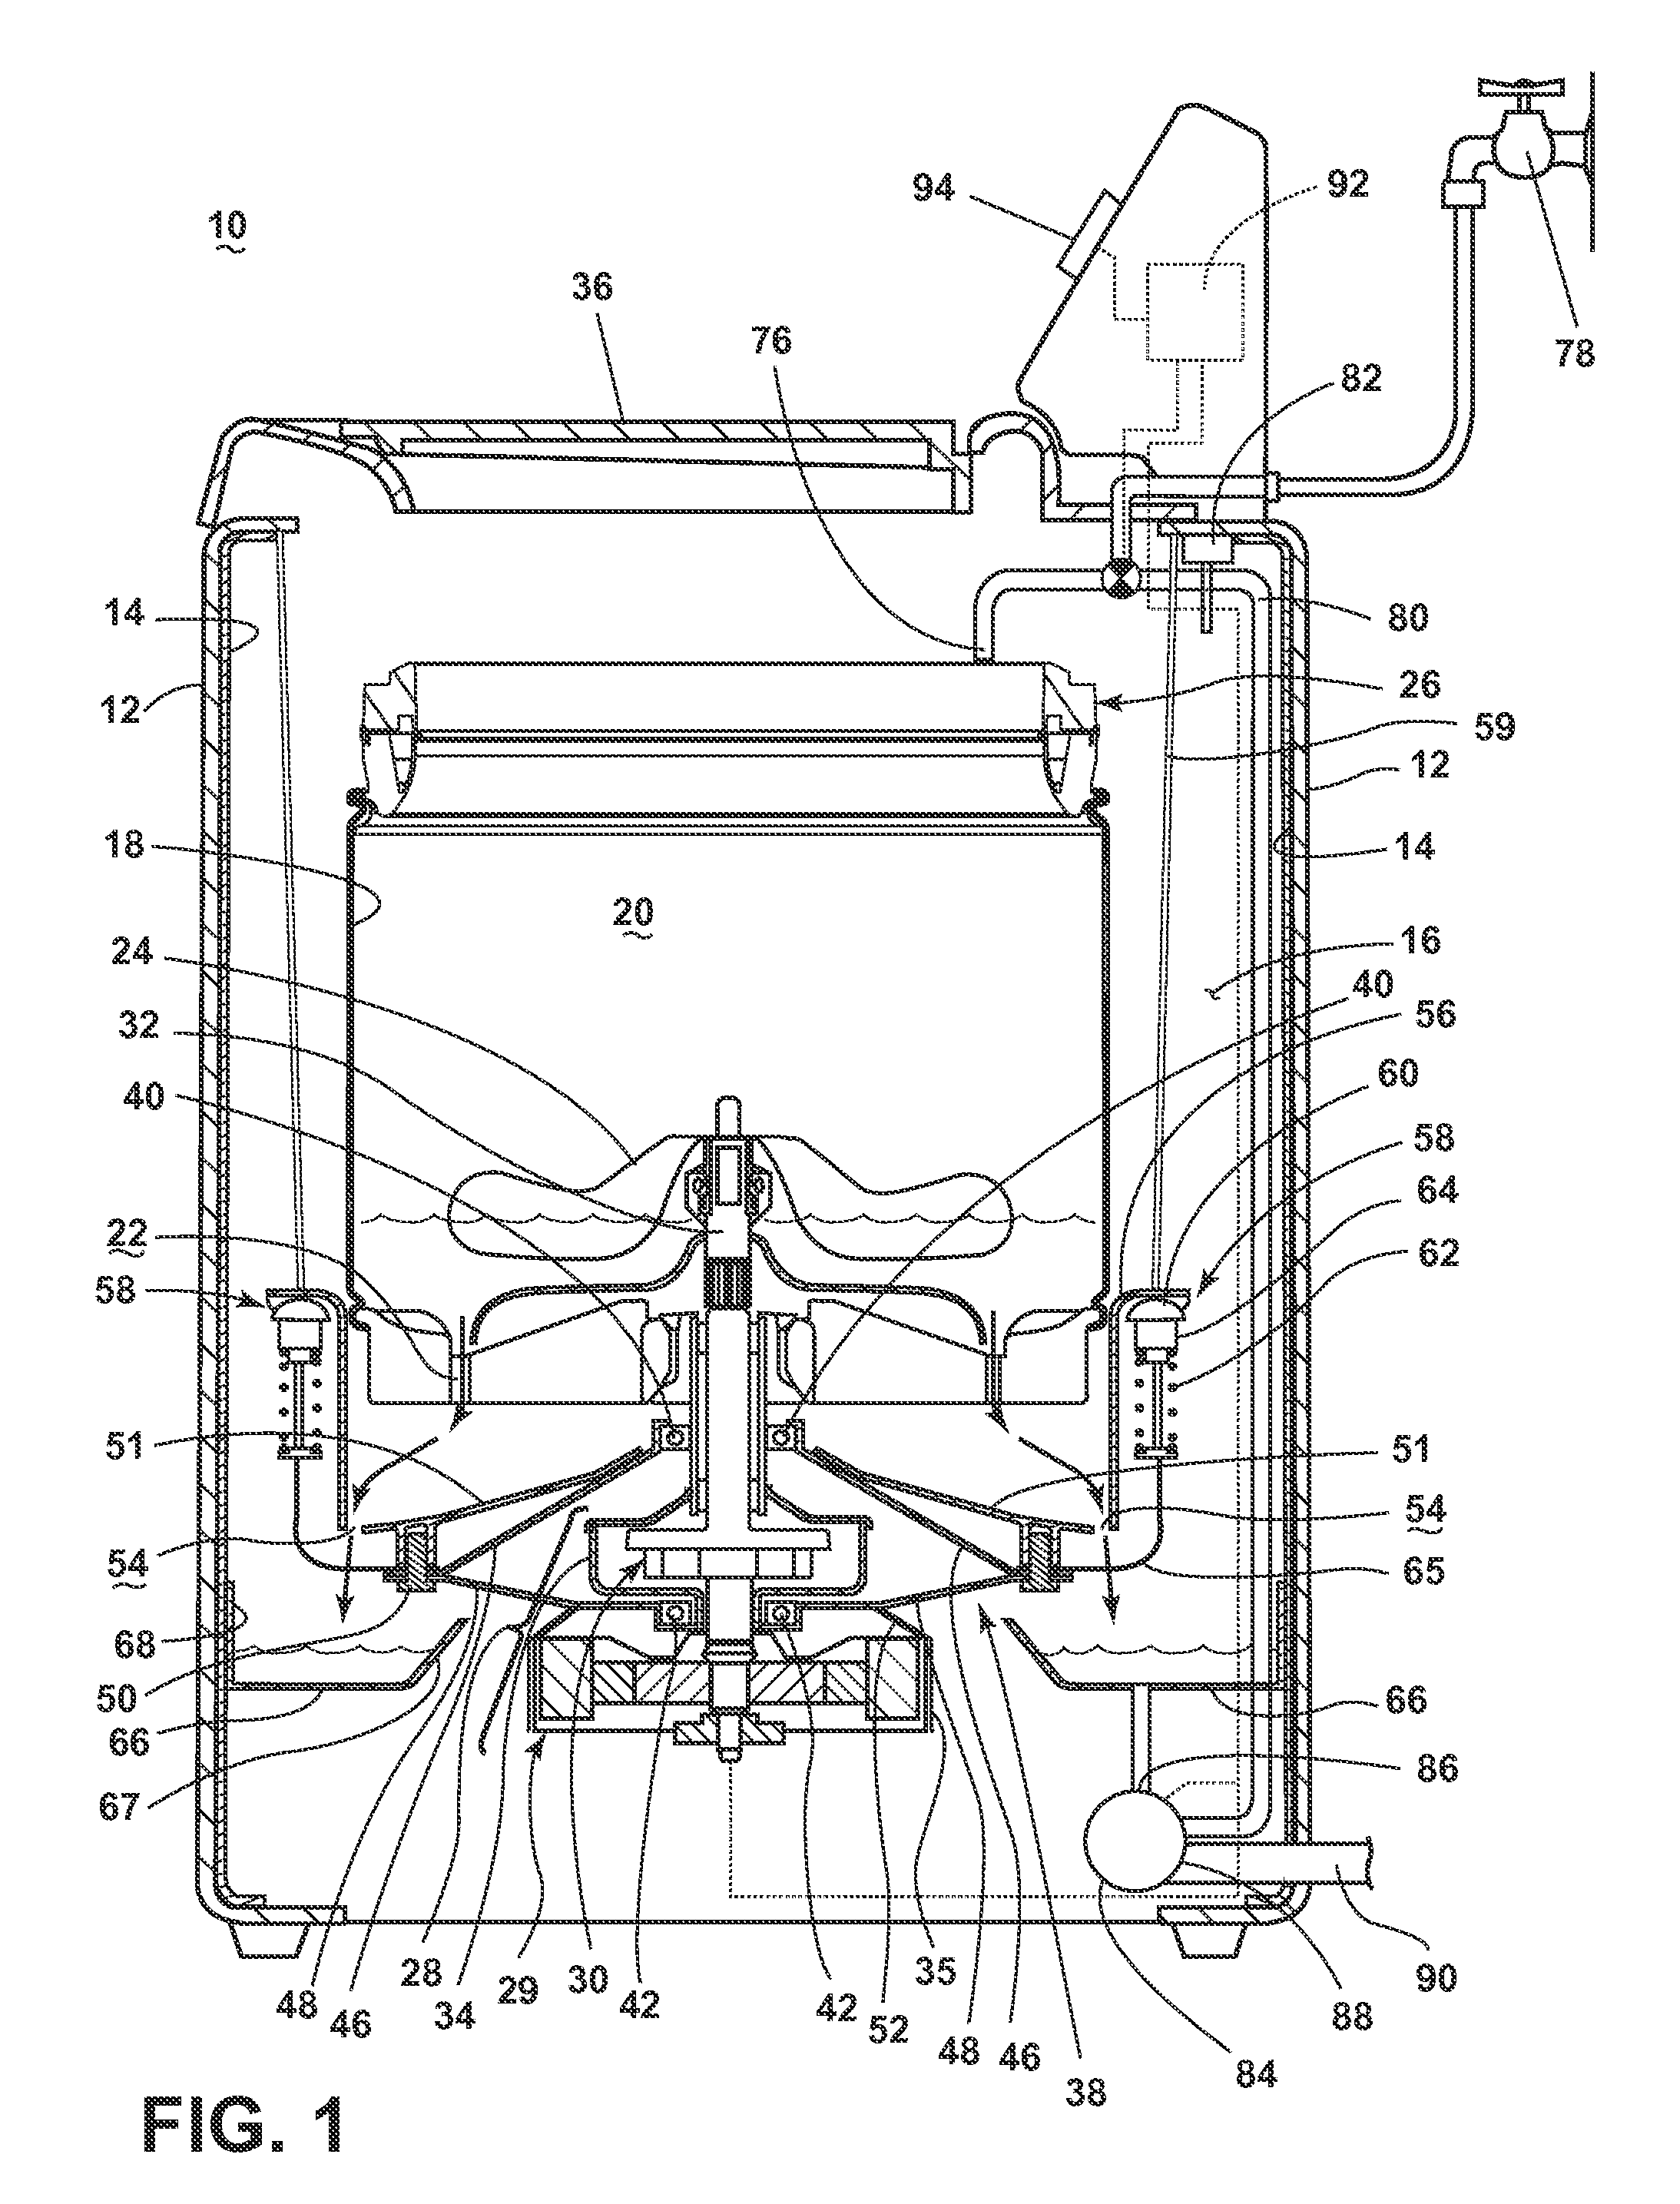 Laundry treating appliance with a static tub and a water trap vapor seal